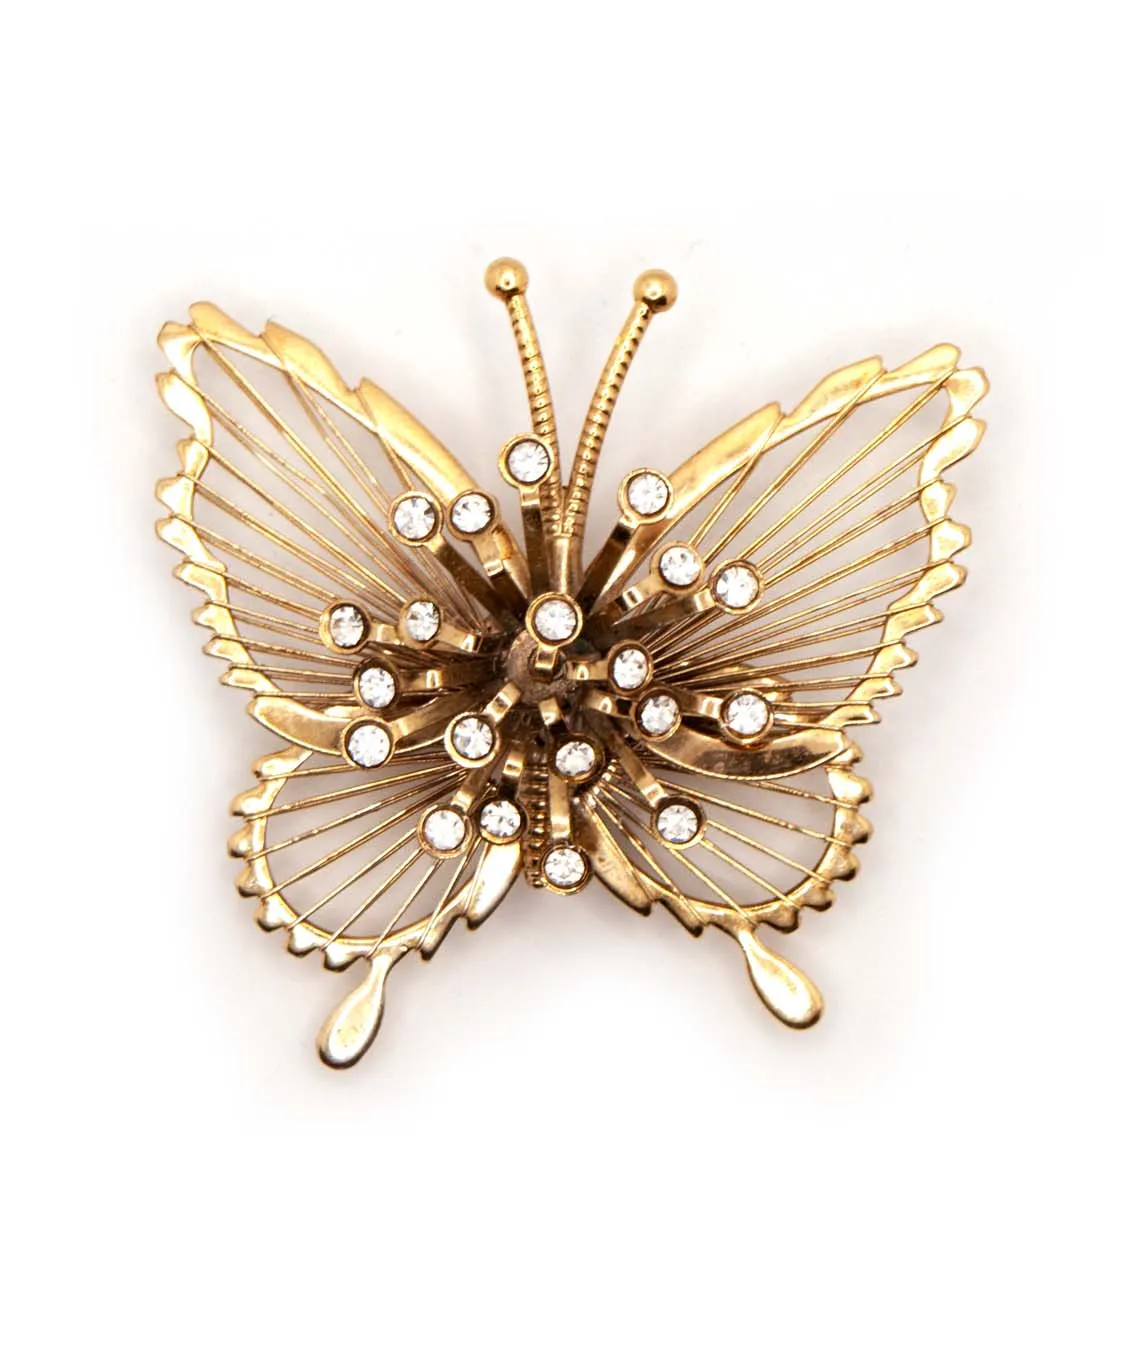 Monet butterfly brooch with crystals